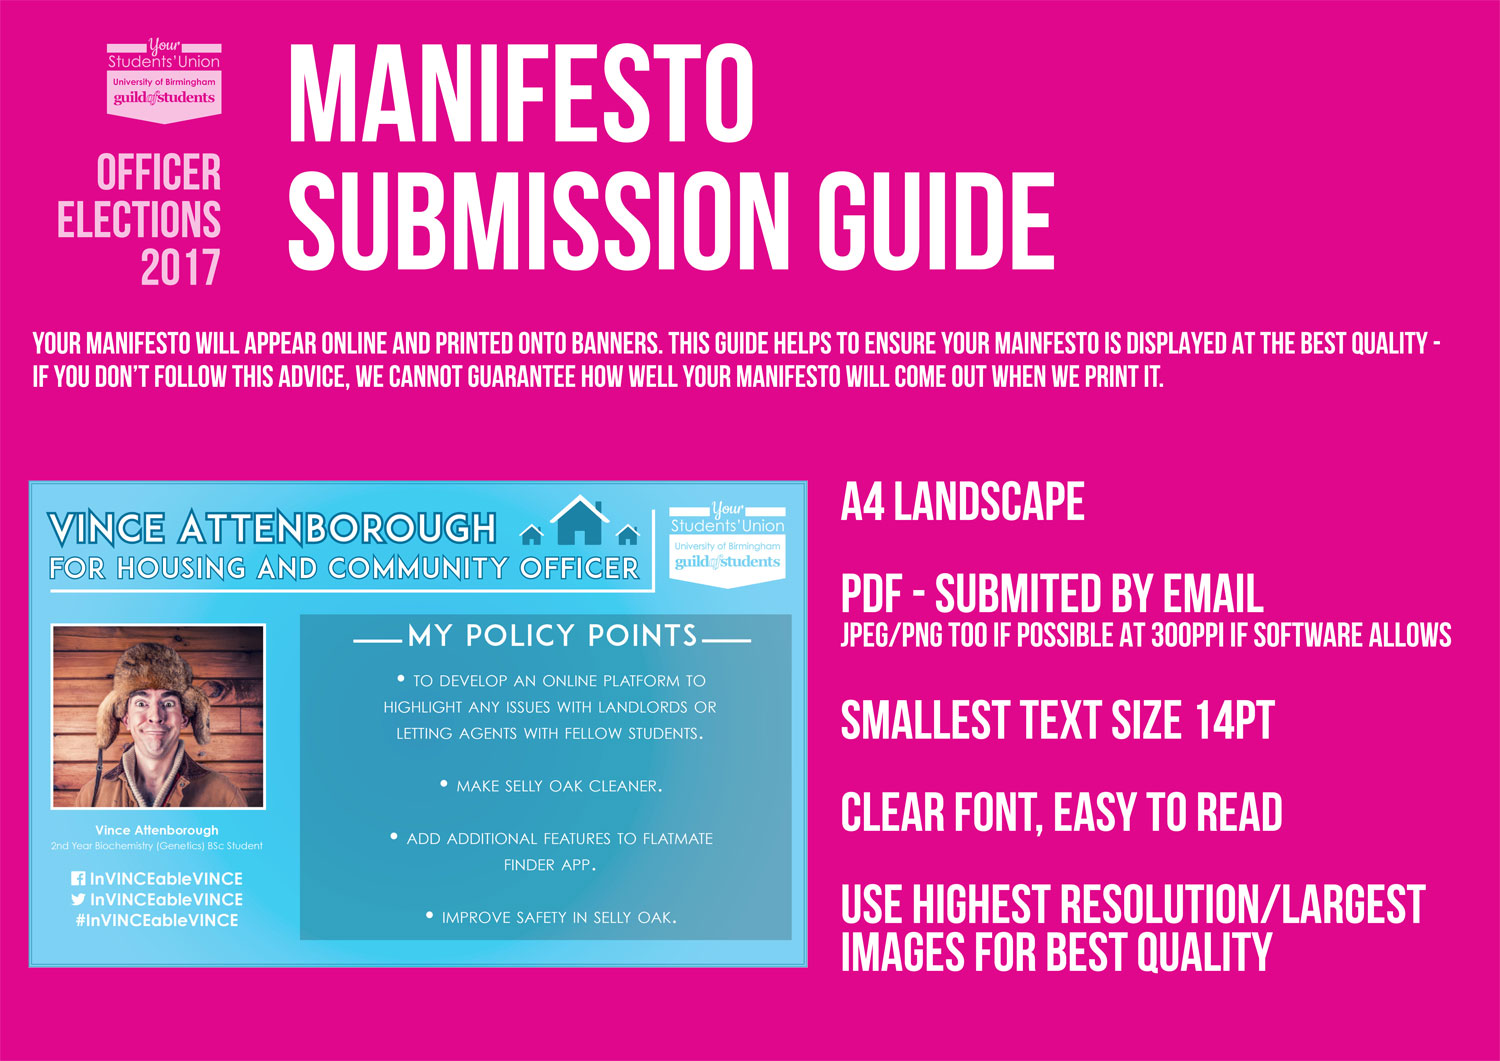 manifesto submission guide - YOUR MANIFESTO WILL APPEAR ONLINE AND PRINTED ONTO BANNERS. THIS GUIDE HELPS TO ENSURE YOUR MAINFESTO IS DISPLAYED AT THE BEST QUALITY - IF YOU DON’T FOLLOW THIS ADVICE, WE CANNOT GUARANTEE HOW WELL YOUR MANIFESTO WILL COME OUT WHEN WE PRINT IT. A4 LANDSCAPE PDF - SUBMITED BY EMAIL JPEG/PNG TOO IF POSSIBLE AT 300PPI IF SOFTWARE ALLOWS SMALLEST TEXT SIZE 14PT CLEAR FONT, EASY TO READ USE HIGHEST RESOLUTION/LARGEST IMAGES FOR BEST QUALITY